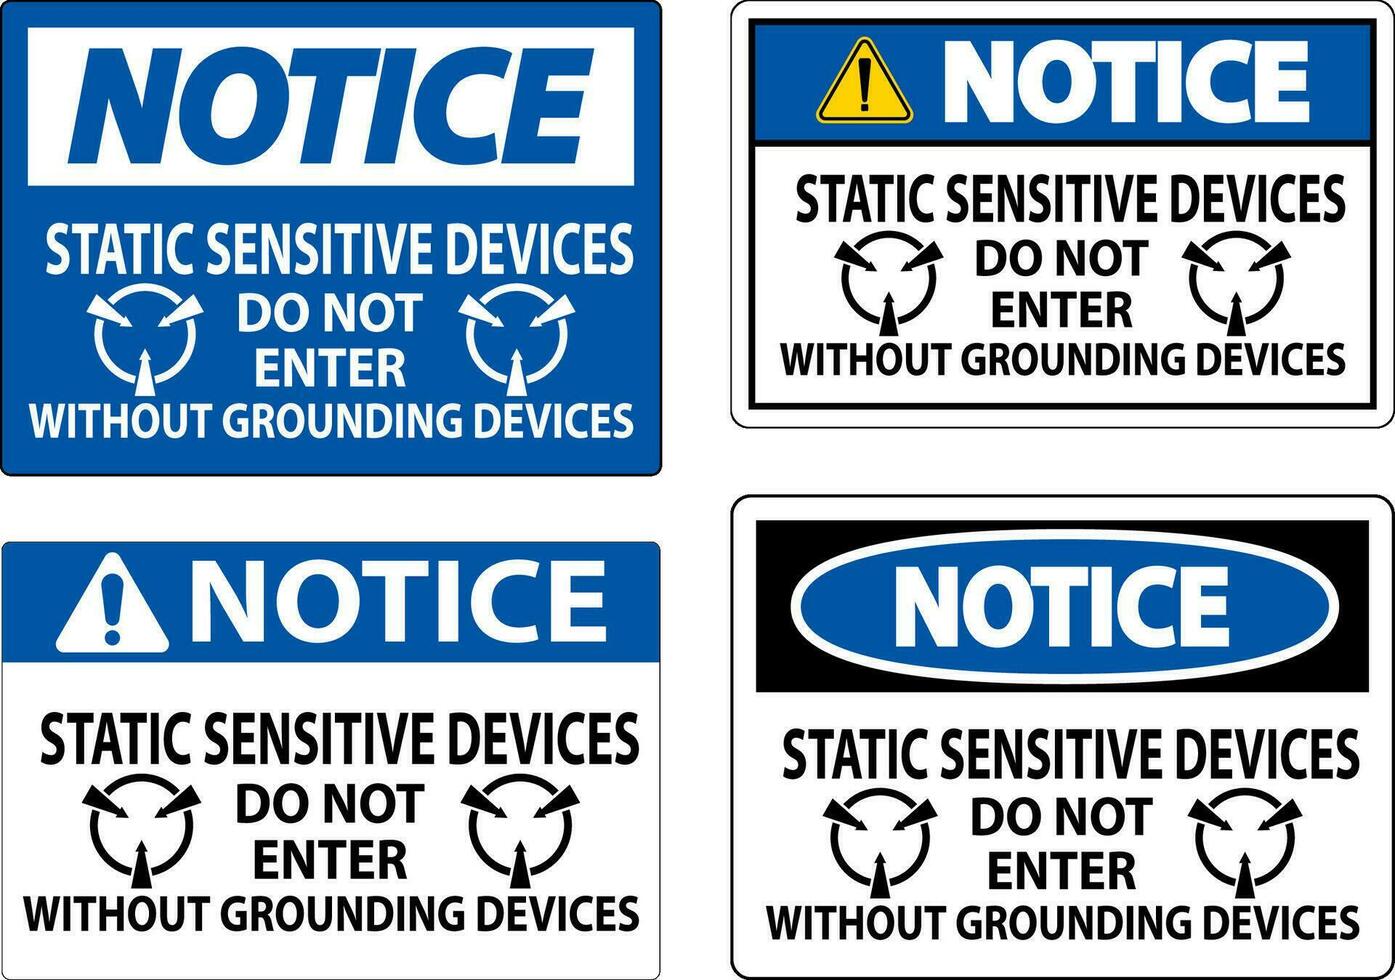 Notice Sign Static Sensitive Devices Do Not Enter Without Grounding Devices vector